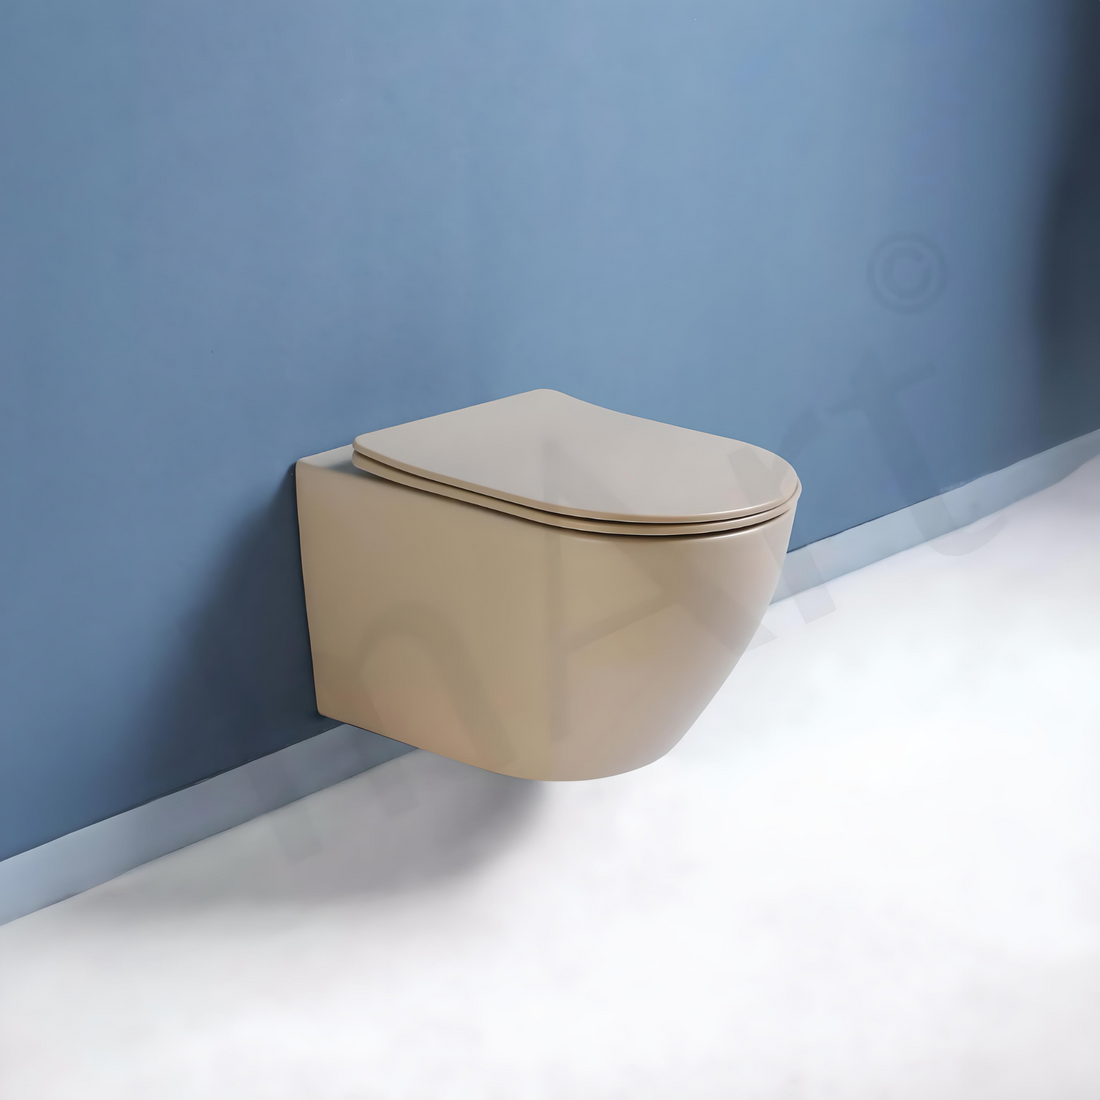 InArt Wall Mounted Ceramic Toilet - Oval Beige Commode with Soft Close Duroplast Seat, Easy Clean, Sleek Design for Bathrooms